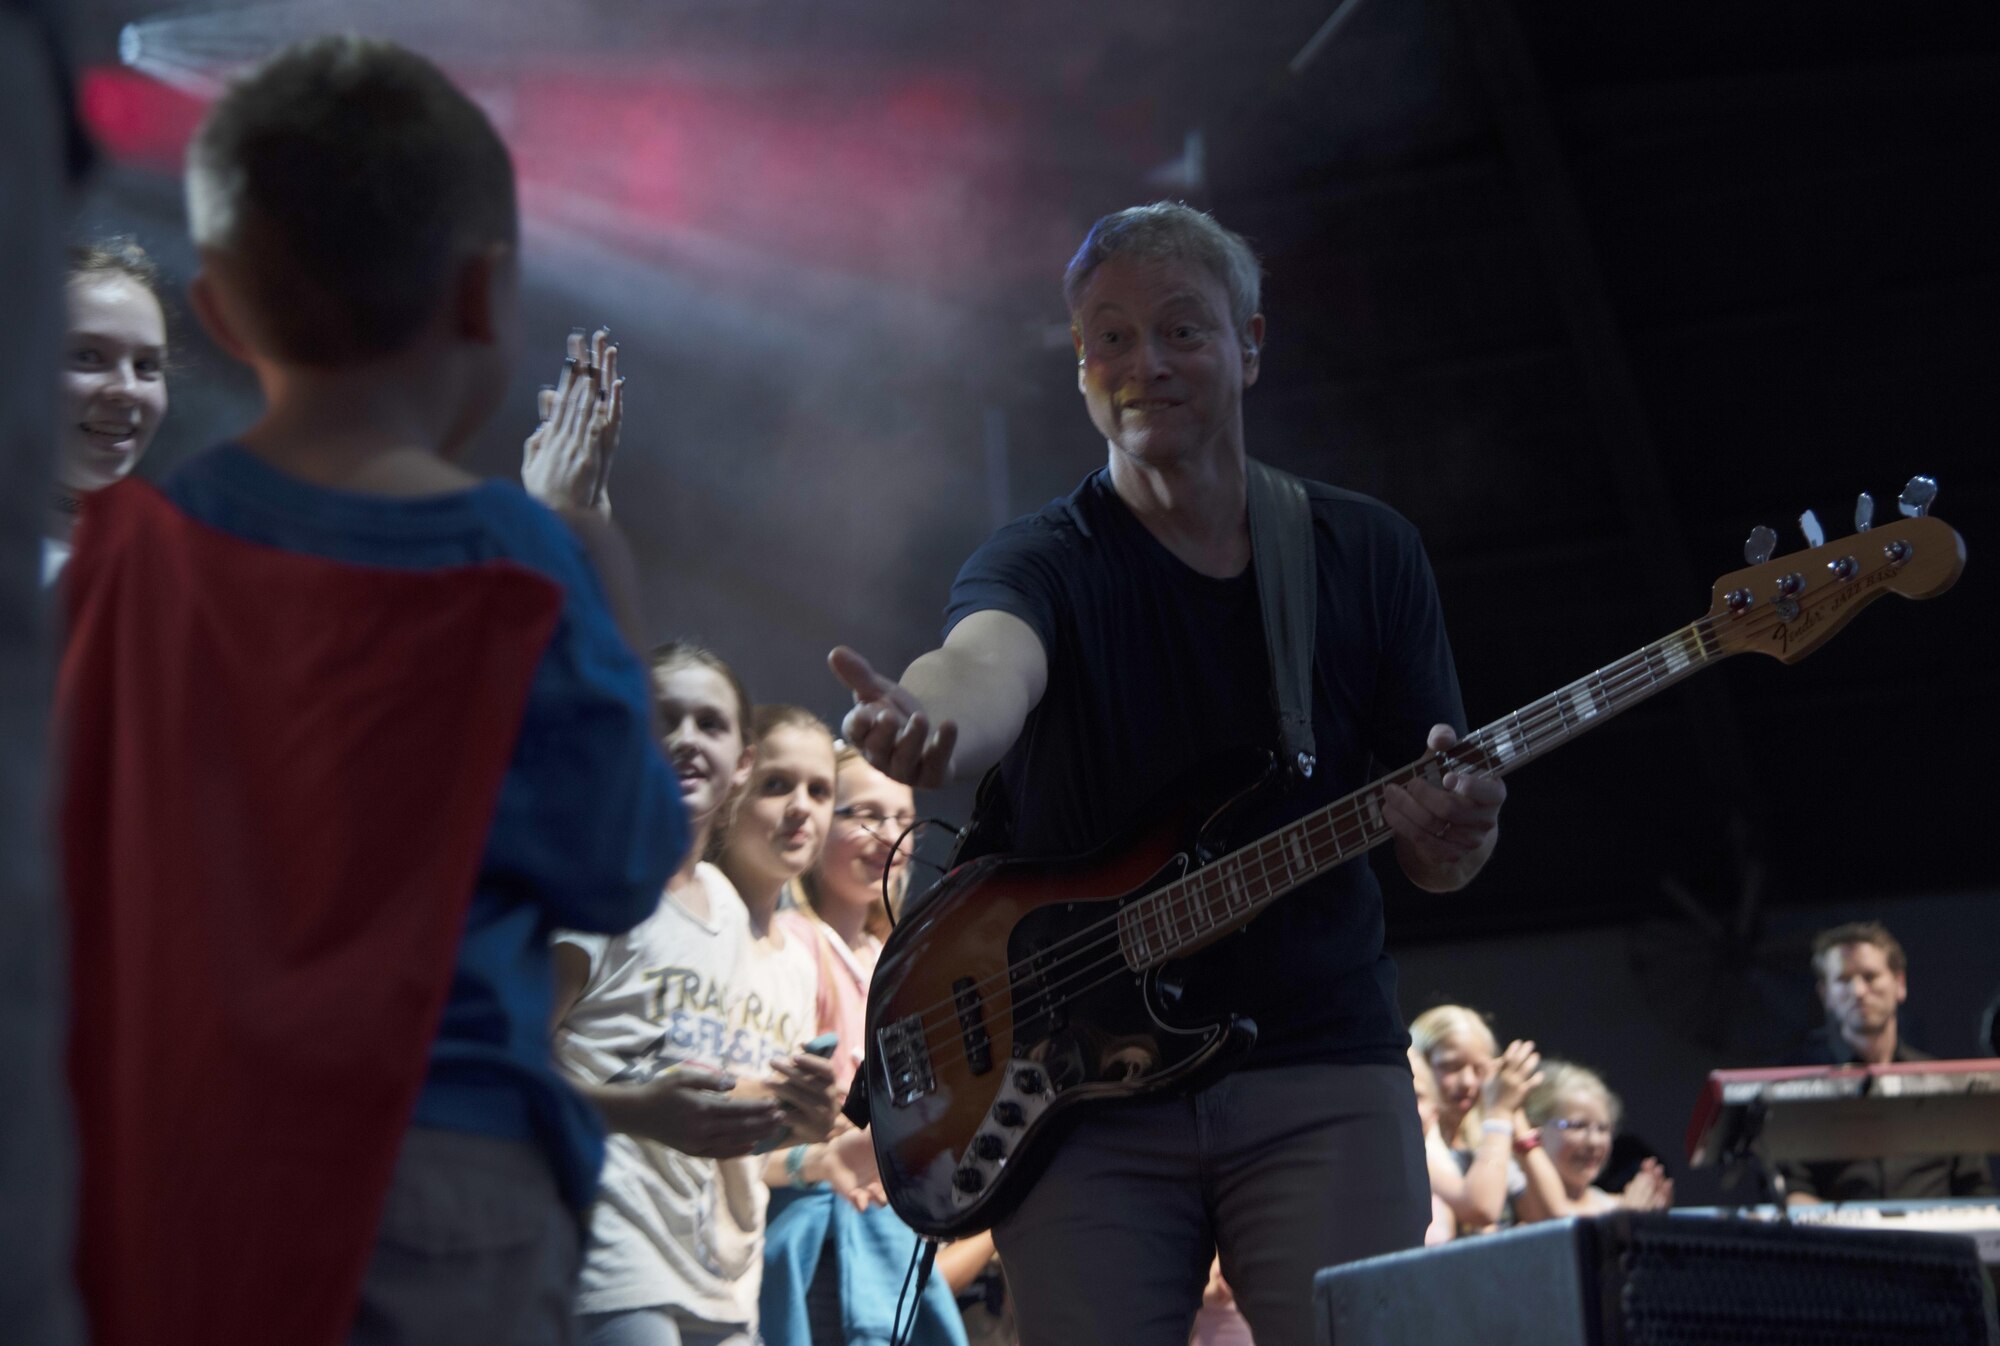 Gary Sinise, the bassist for the Lt. Dan Band, encourages a boy to join the stage during a concert at MacDill Air Force Base, Fla., April 29, 2017. The band invited Team MacDill youth on stage to sing along during their performance. (U.S. Air Force photo by Airman 1st Class Adam R. Shanks)